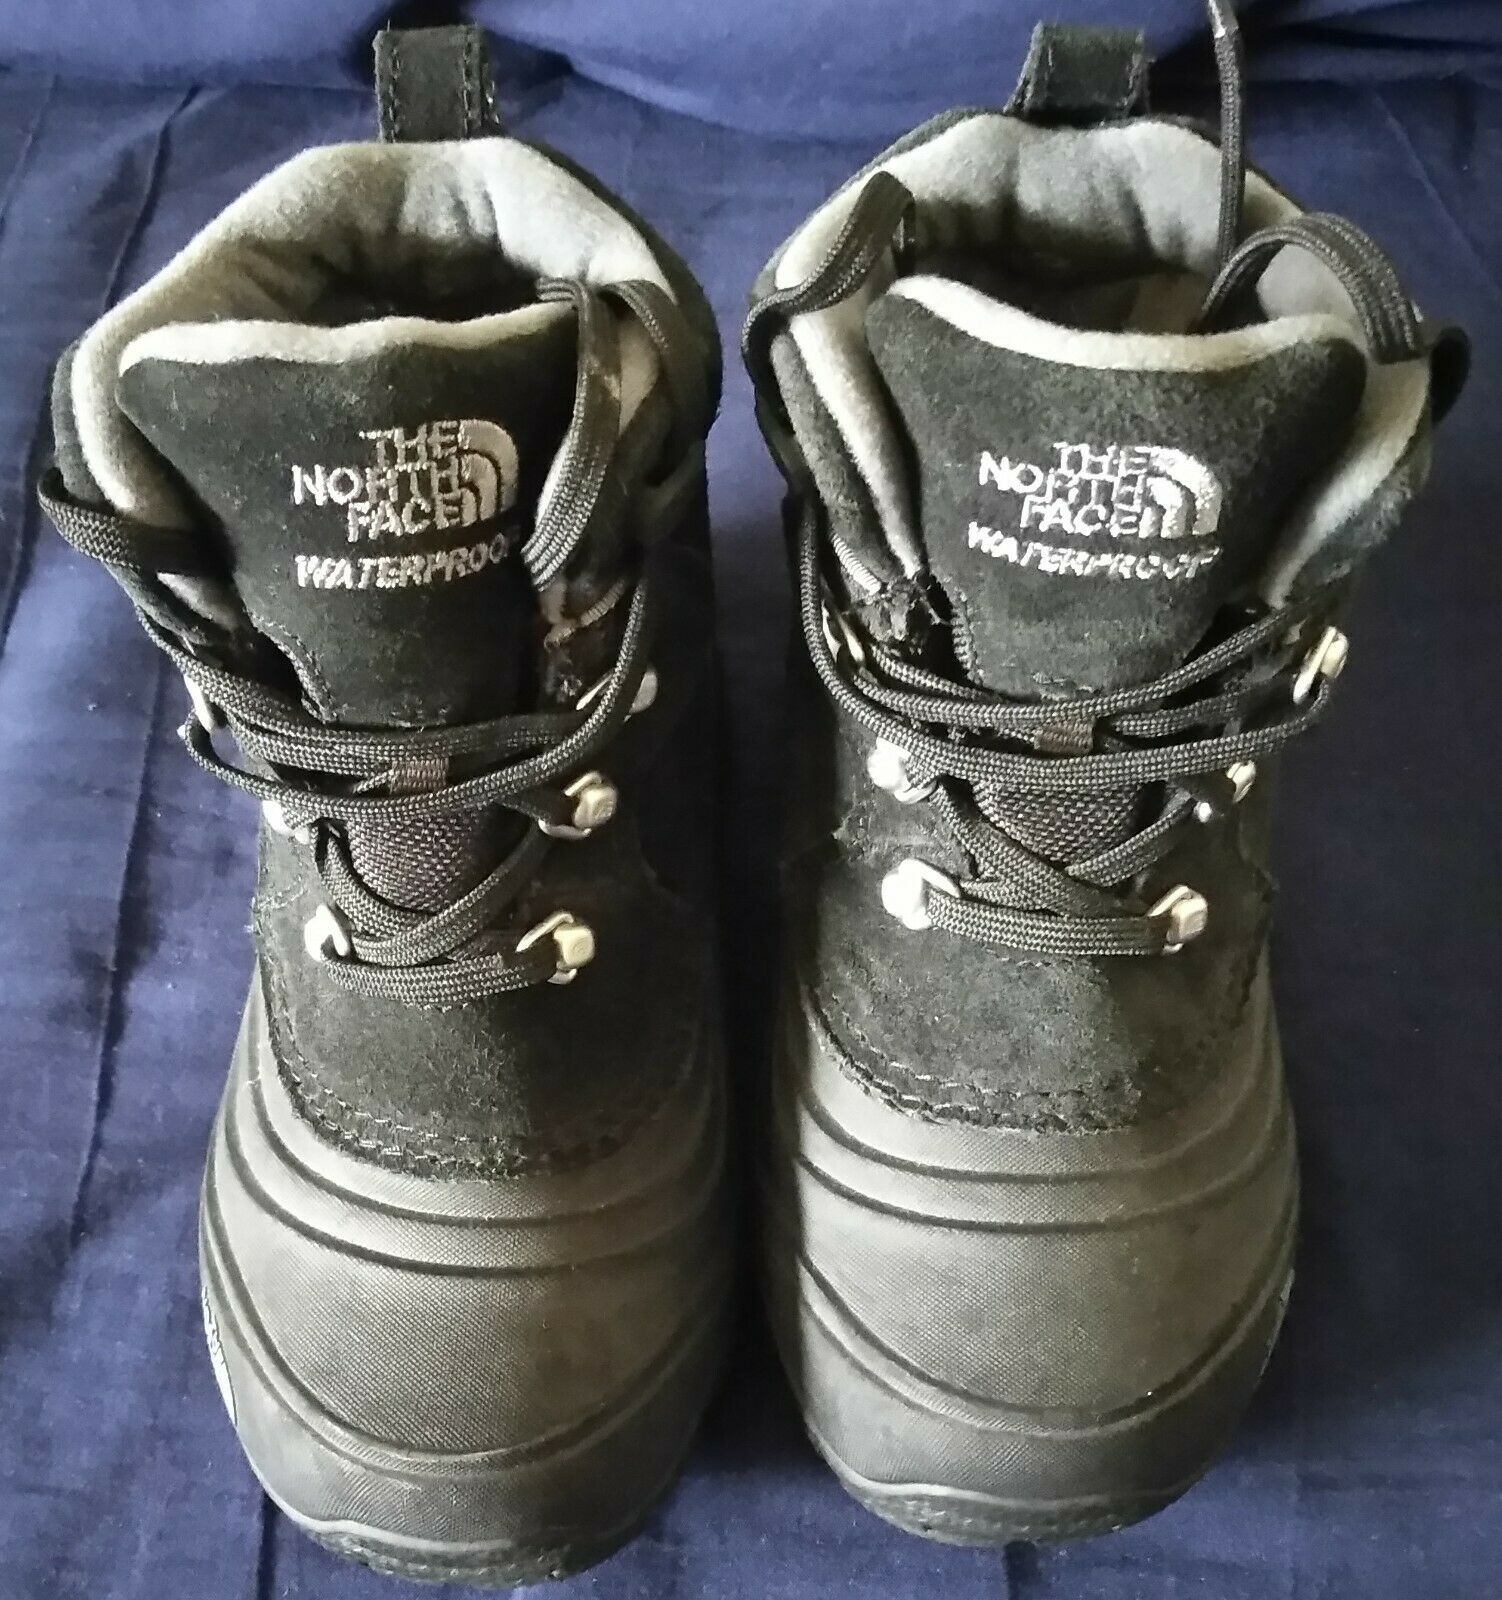 Primary image for The North Face Heat Seeker Kids Boots Size 12 